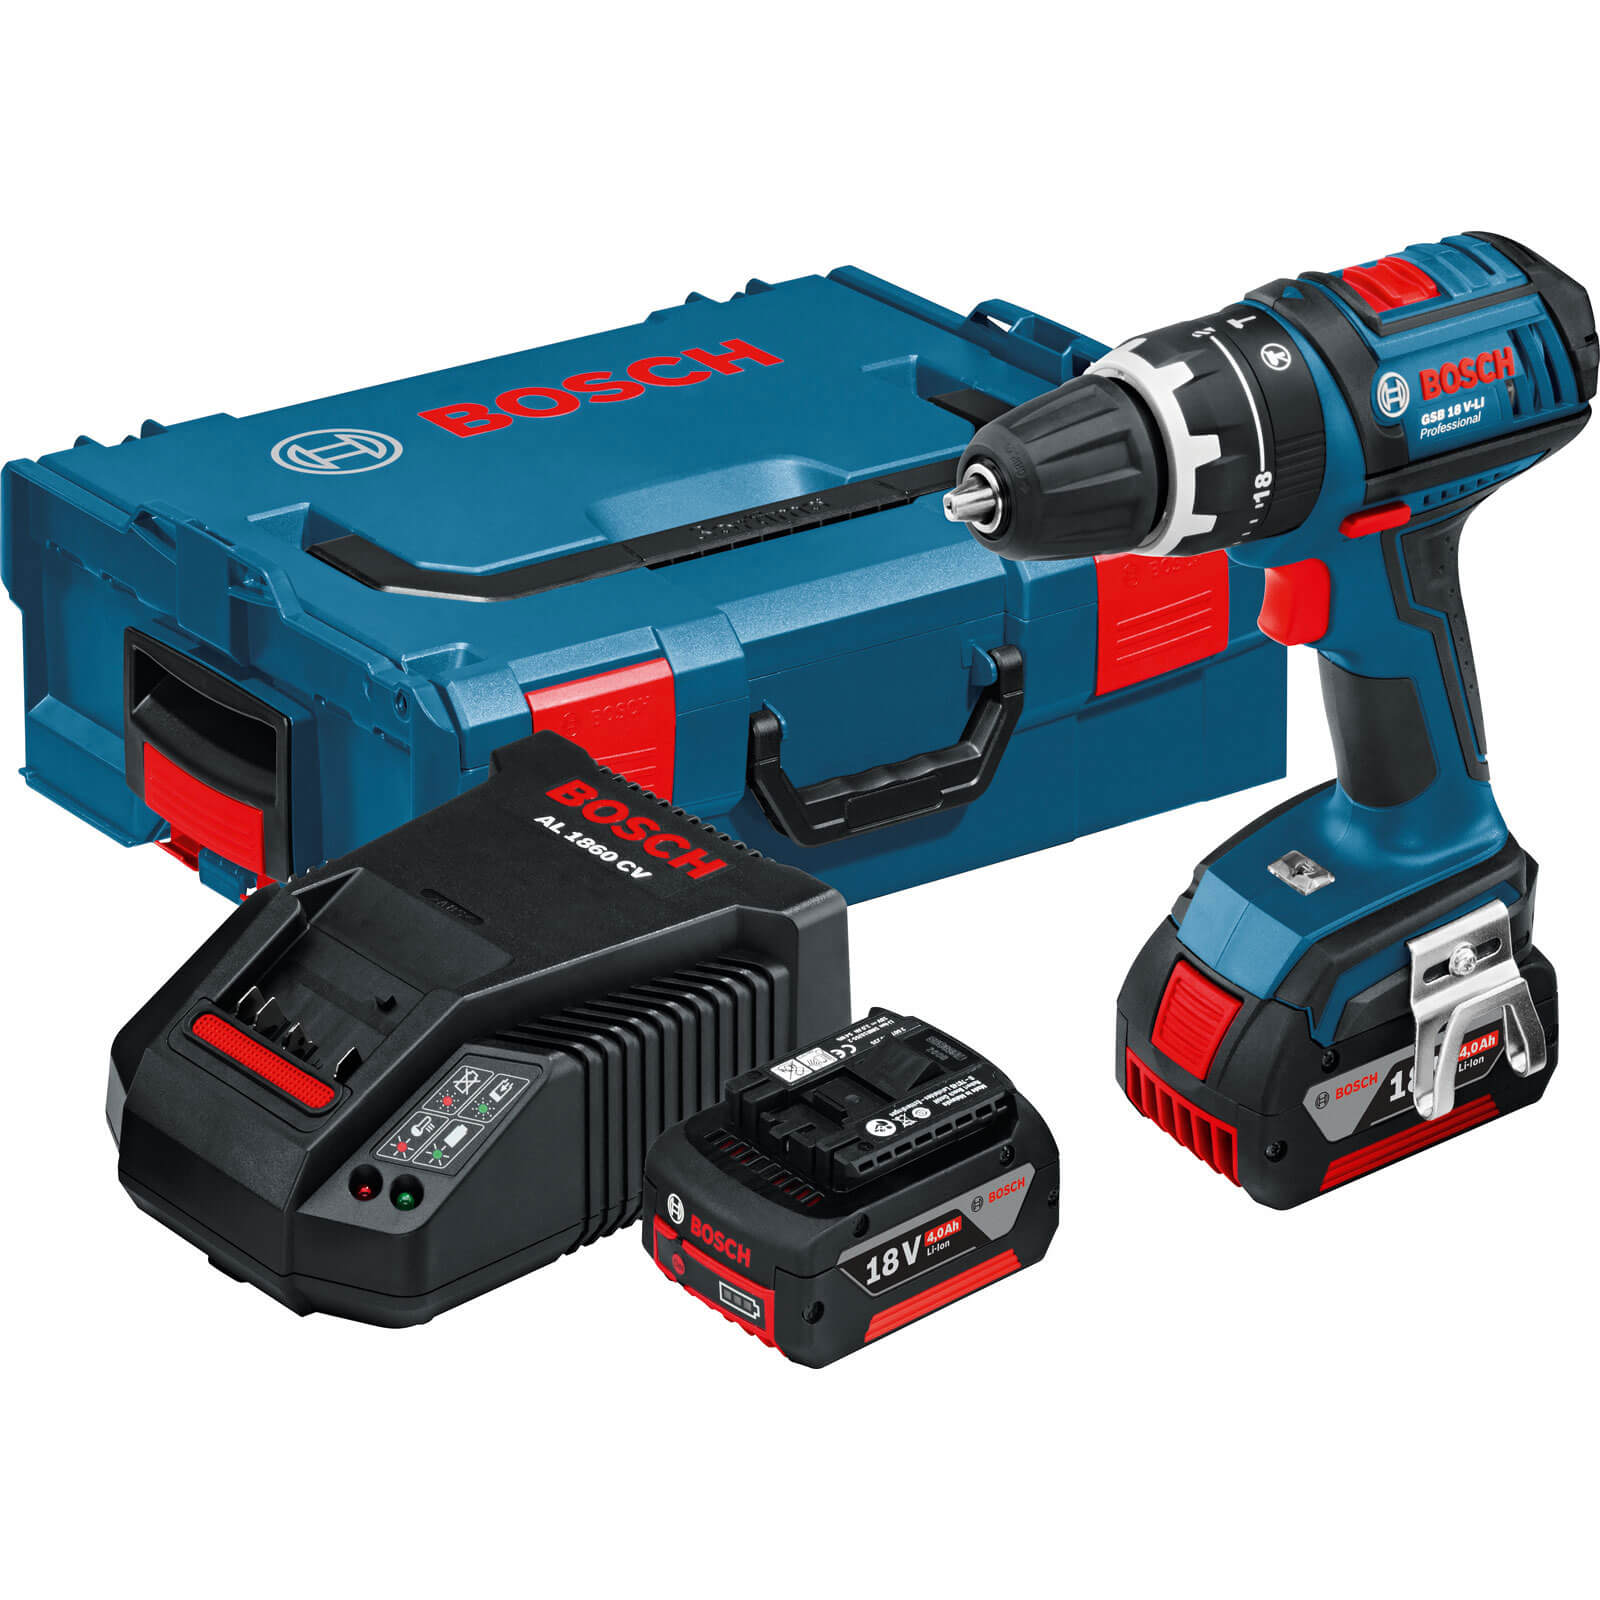 Bosch GSB 18 V-LI 18v Cordless Dynamicseries 2 Speed Combi Drill with 1 Lithium Ion Batteries 4ah +L